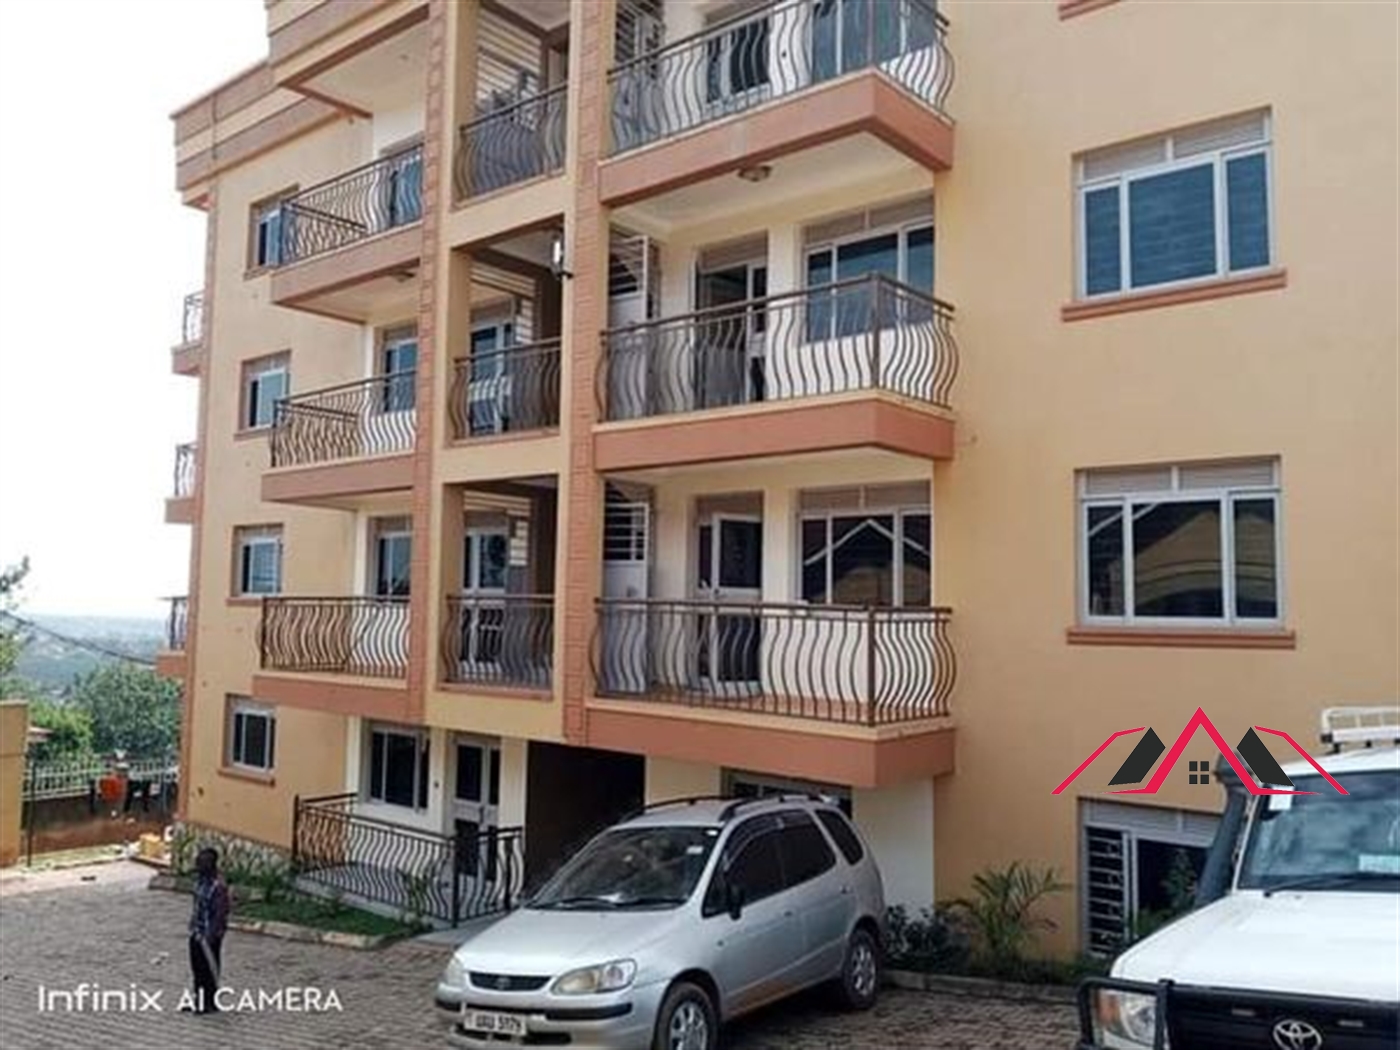 Apartment for rent in Mpererewe Kampala